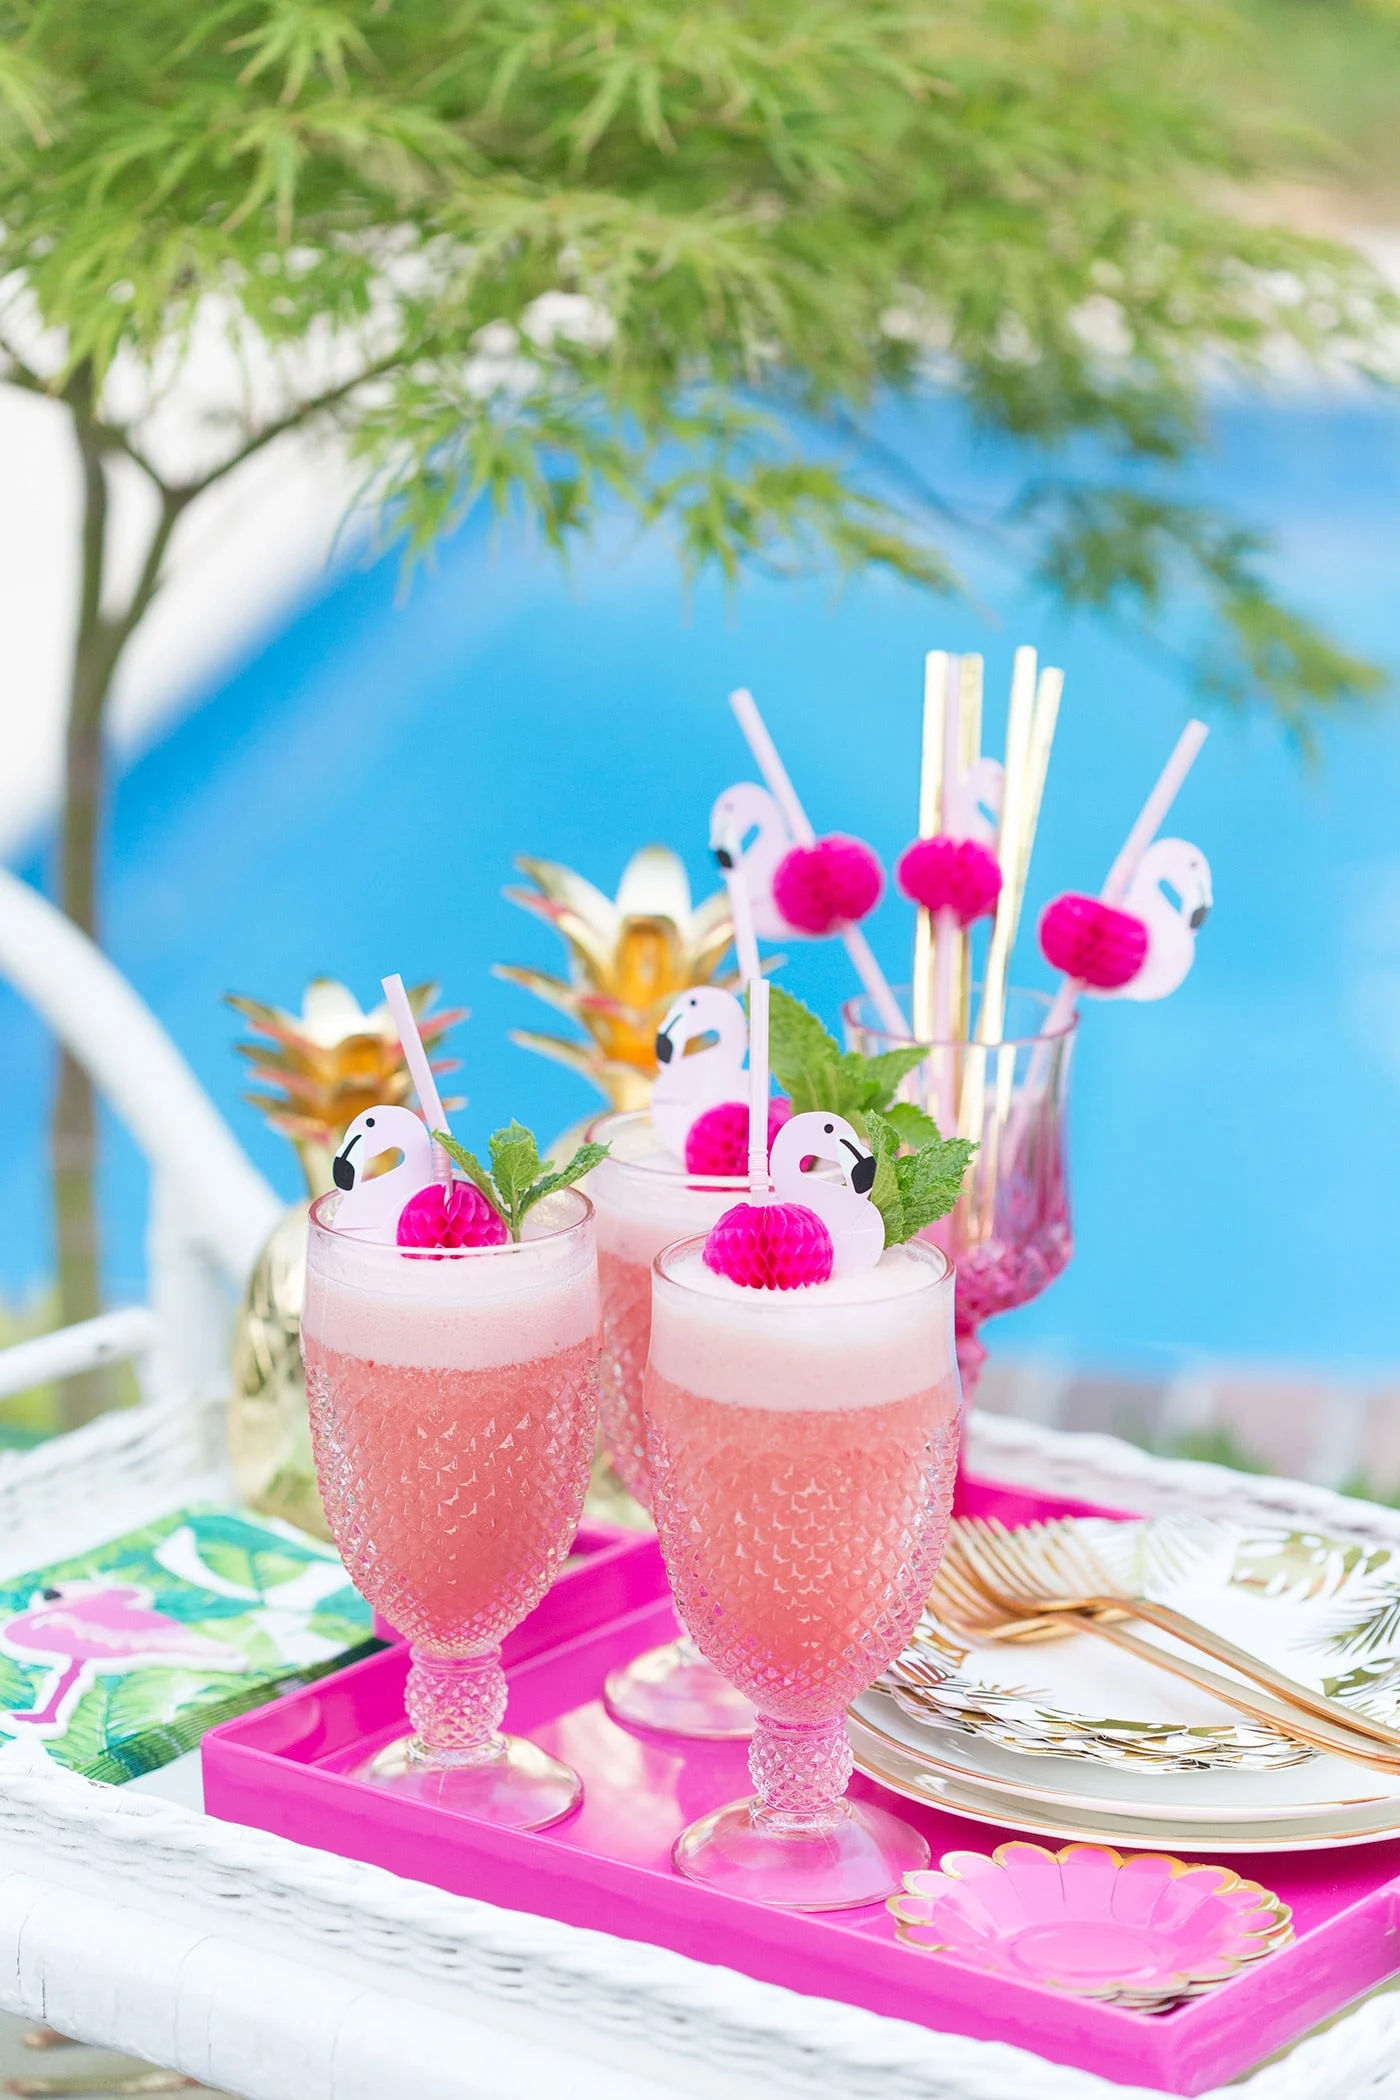 Pink tray with three glasses filled with bright pink Flamingo Punch cocktails, each glass garnished with a straw with a paper flamingo on it.